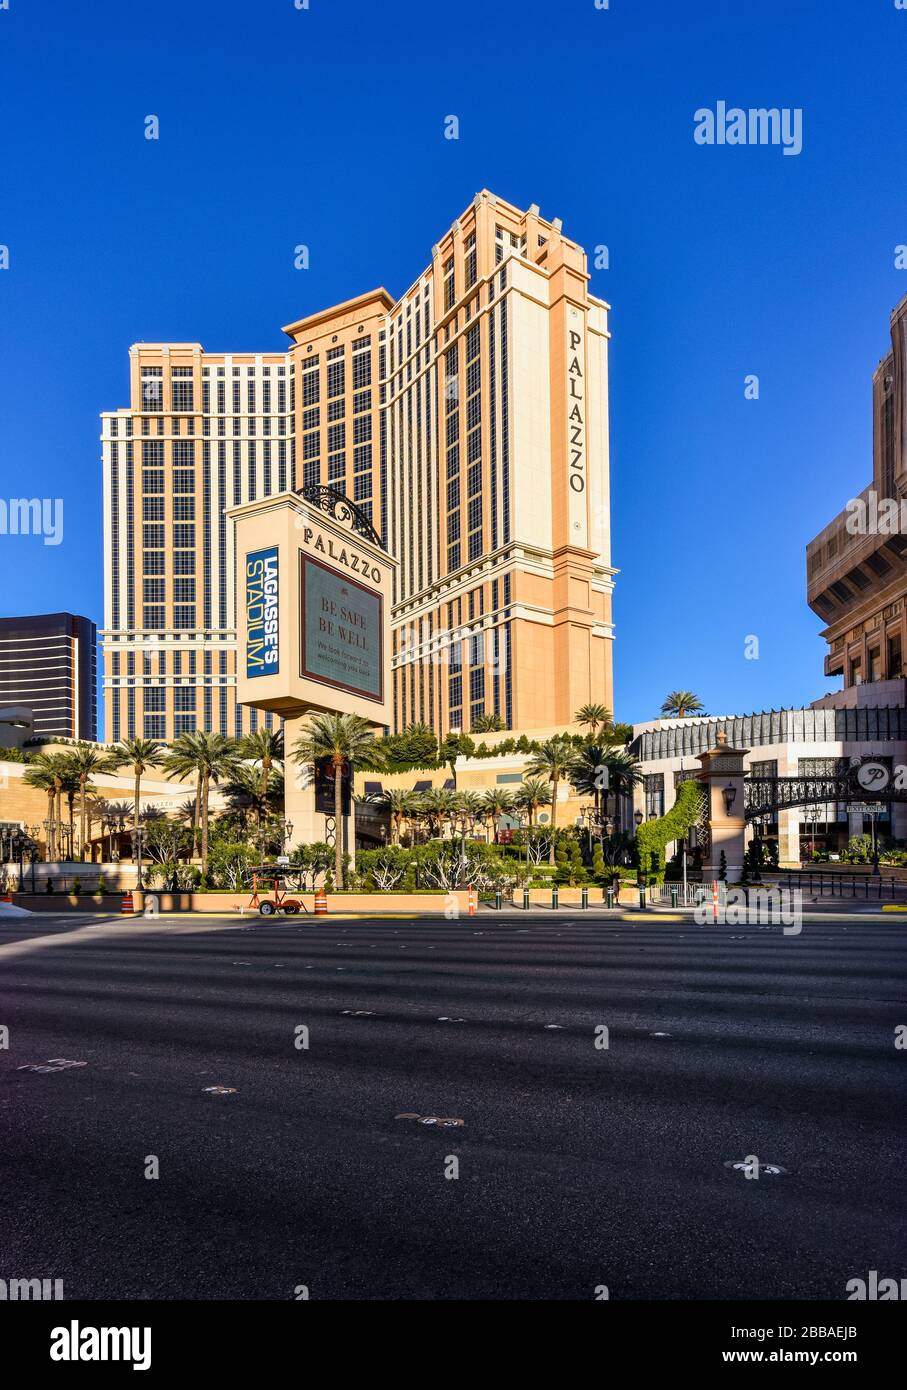 One week into the Las Vegas shut down due to Coronavirus, the Strip is fairly empty. No people on the streets and everything is closed. Stock Photo